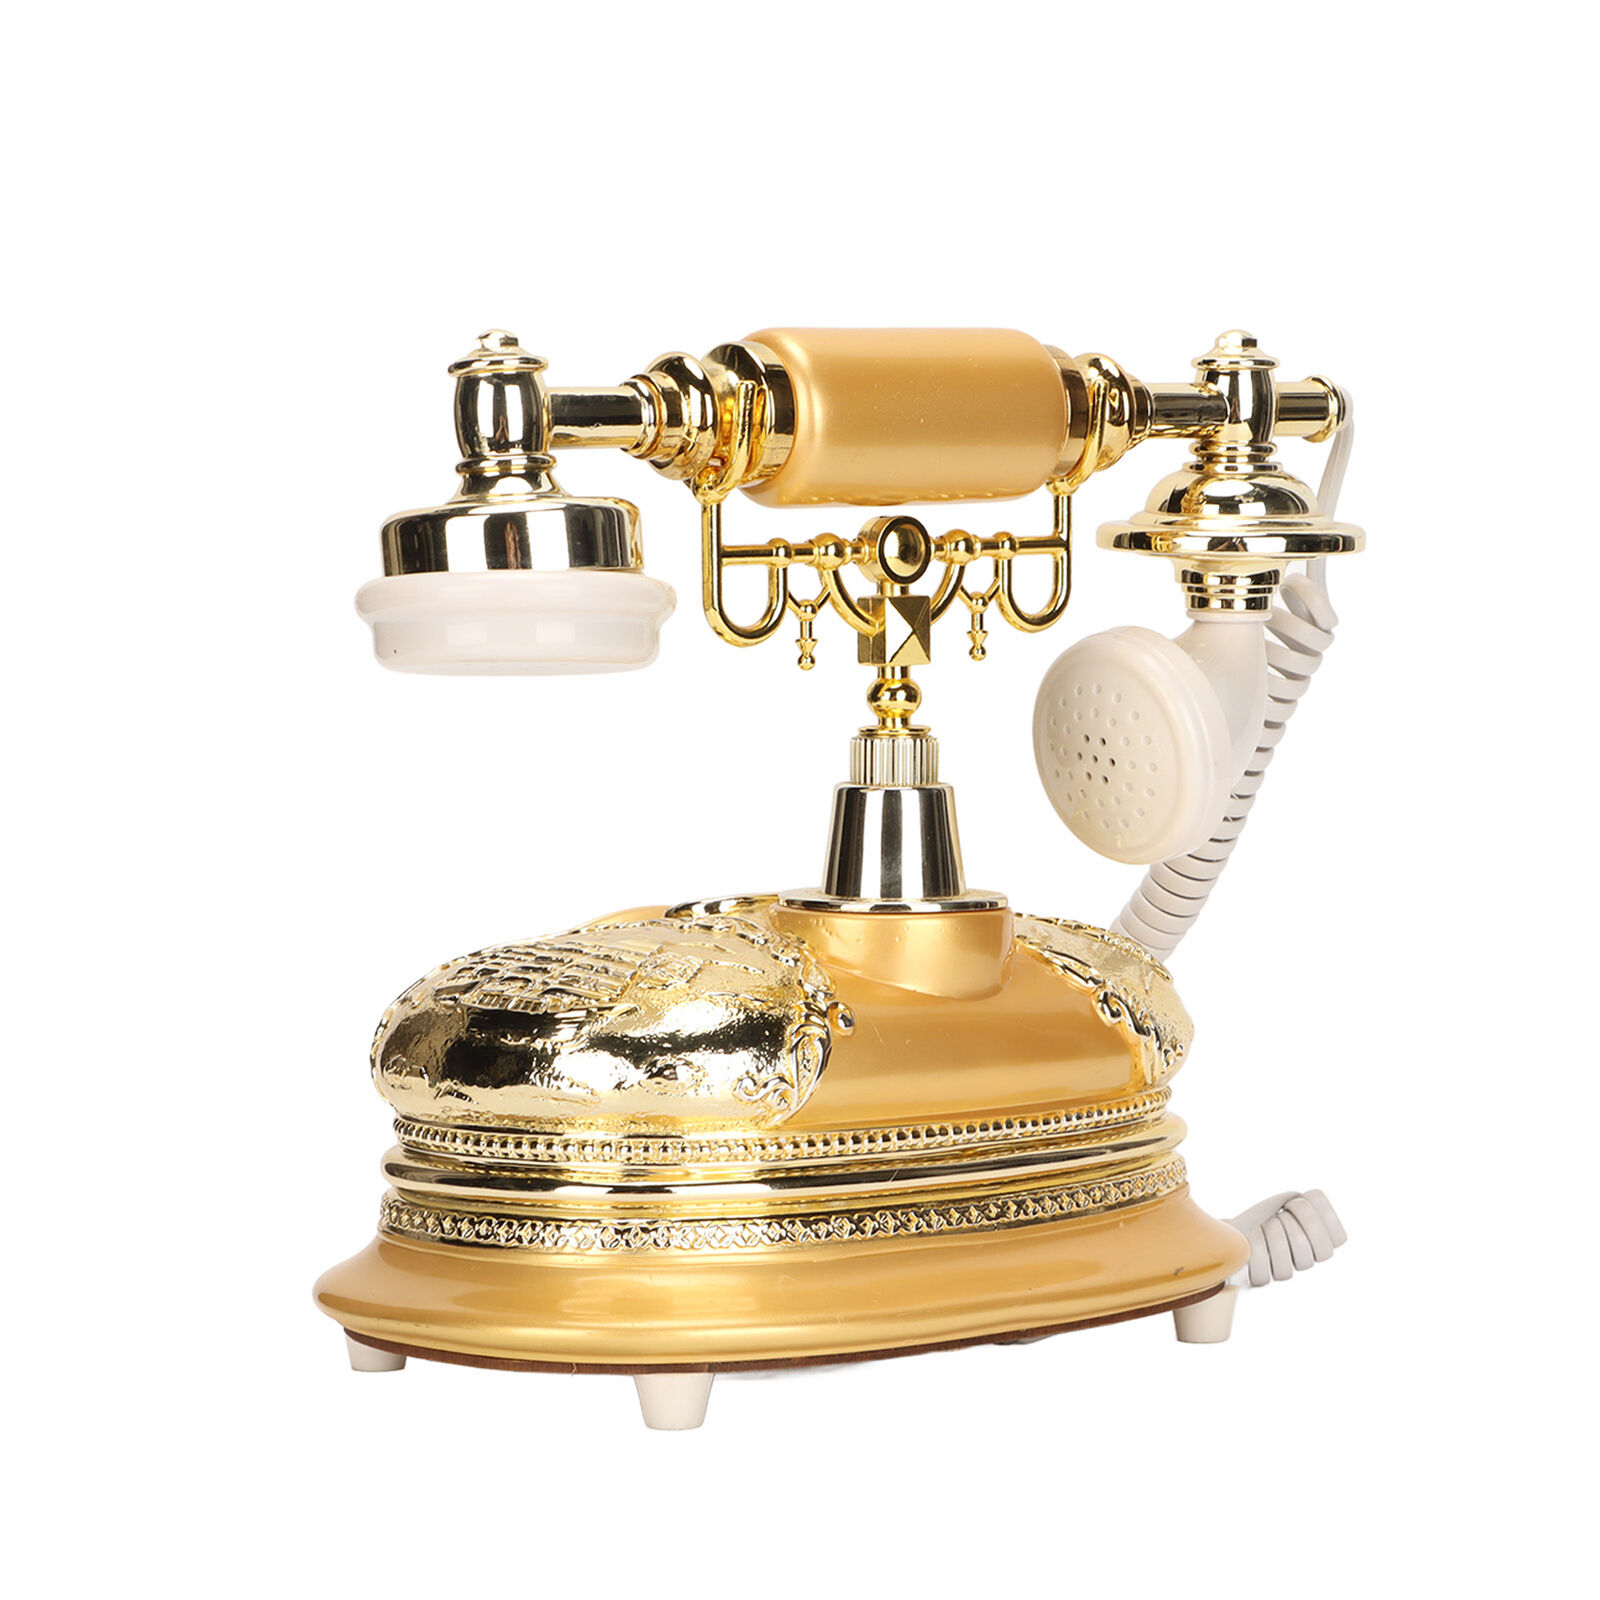 European Vintage Telephone Classical Retro Telephone For Office For Bedroom For